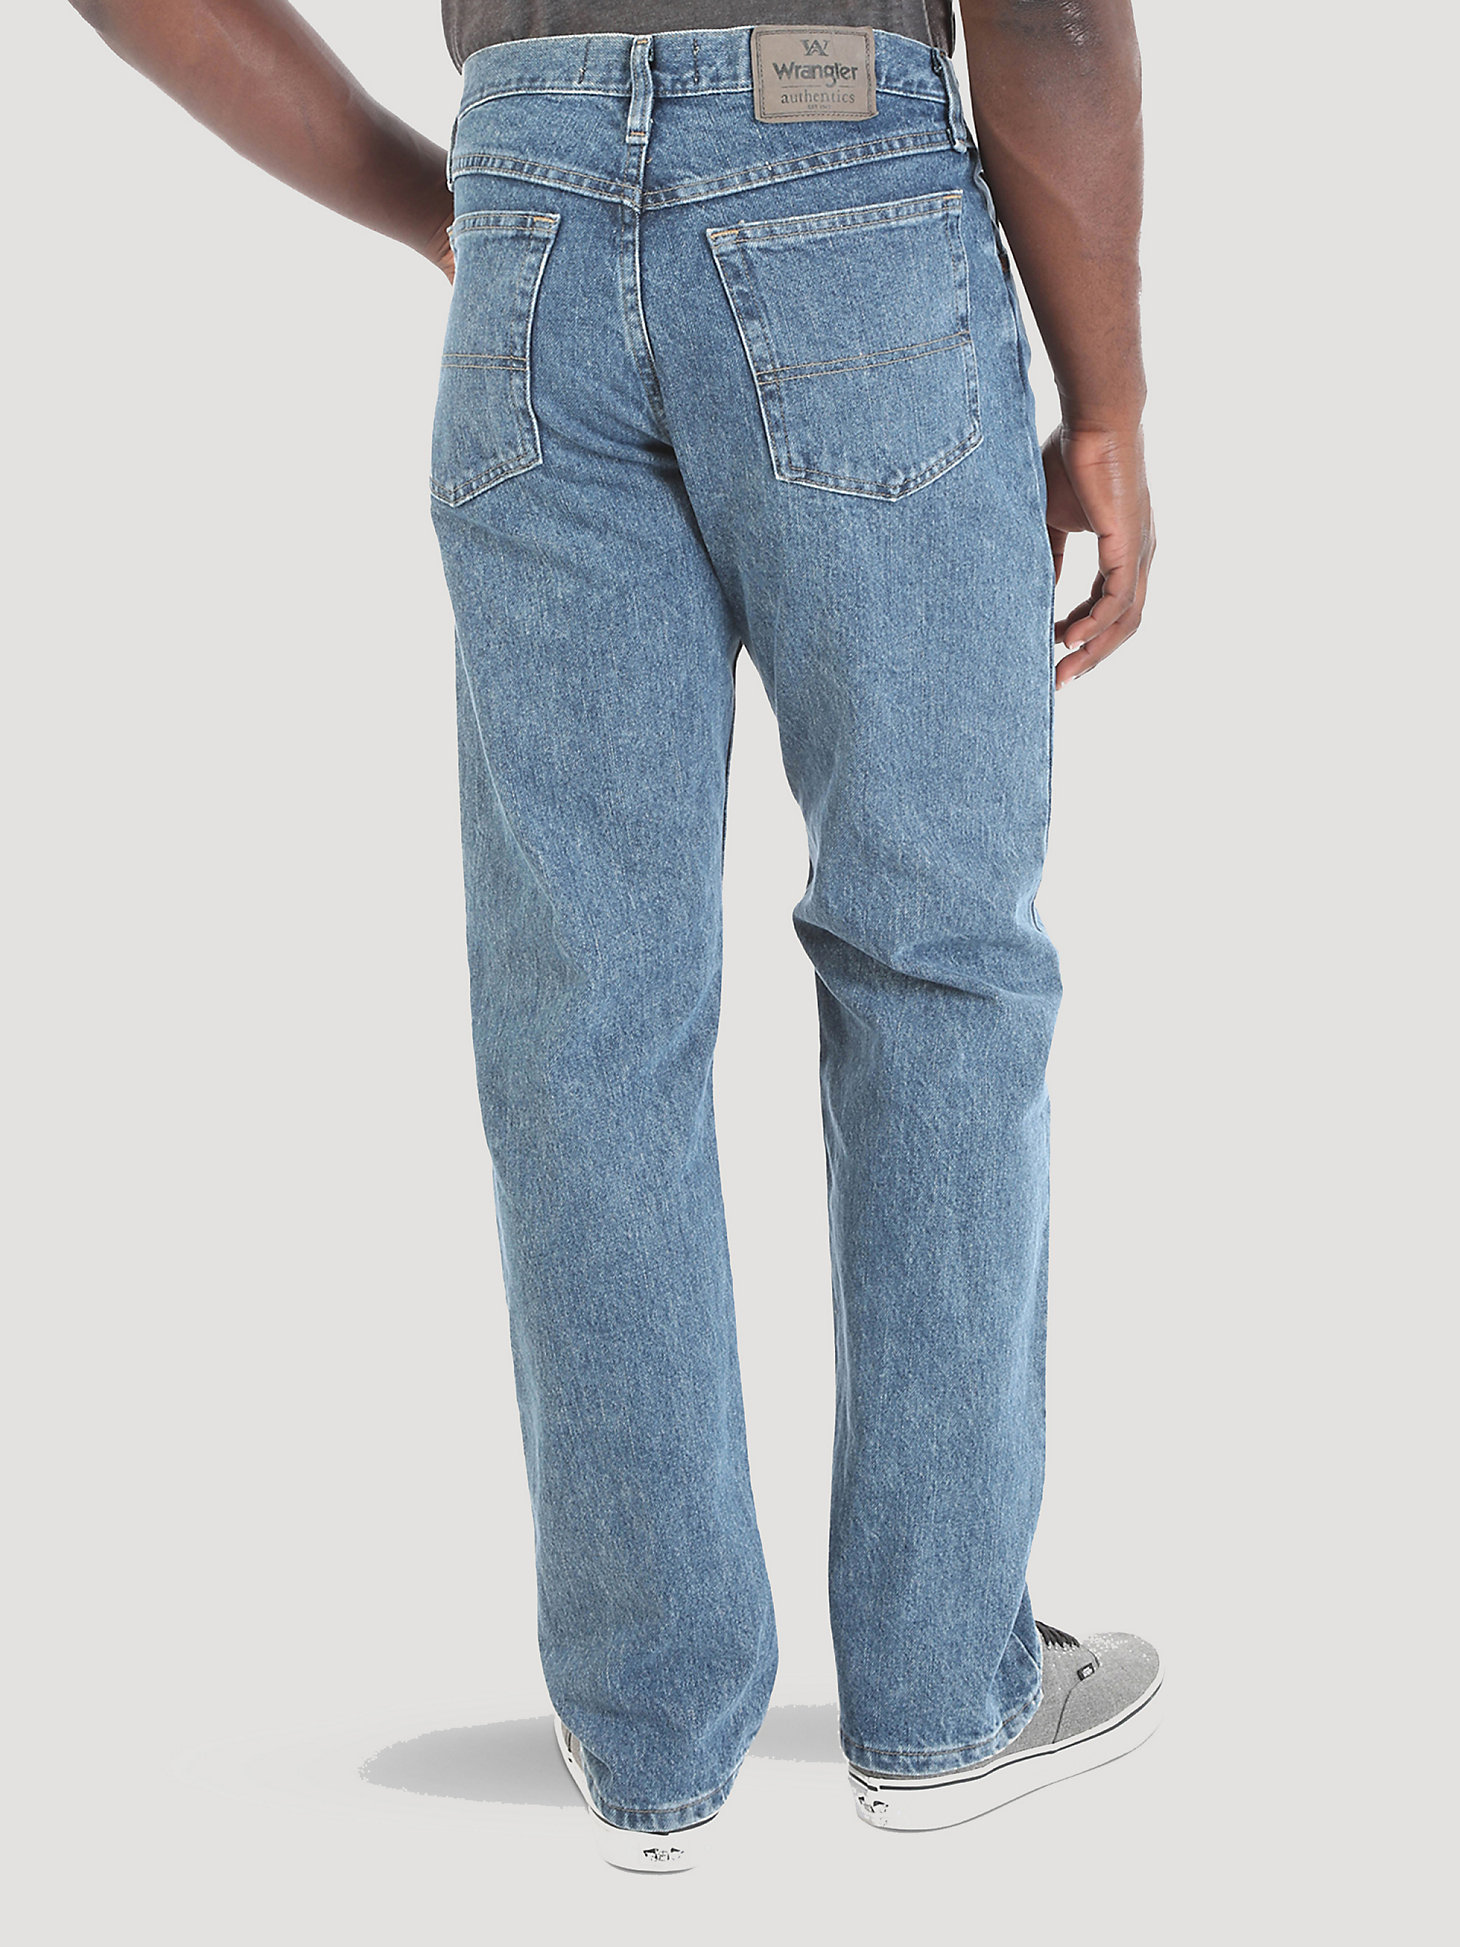 Men's Wrangler Authentics® Relaxed Fit Cotton Jean in Vintage Stone alternative view 1